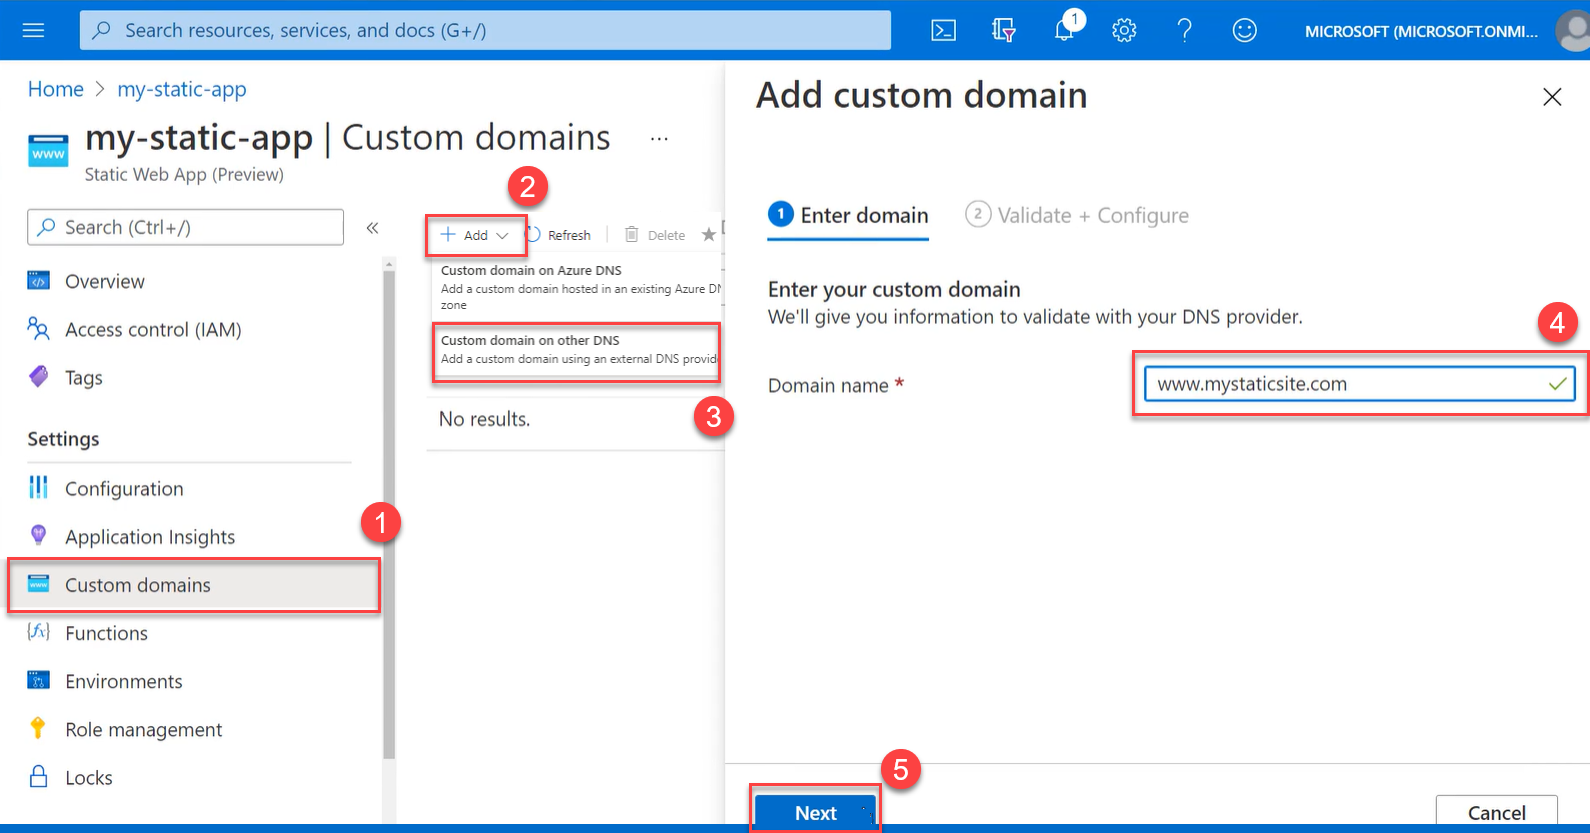 Screenshot showing sequence of steps in add custom domain form.